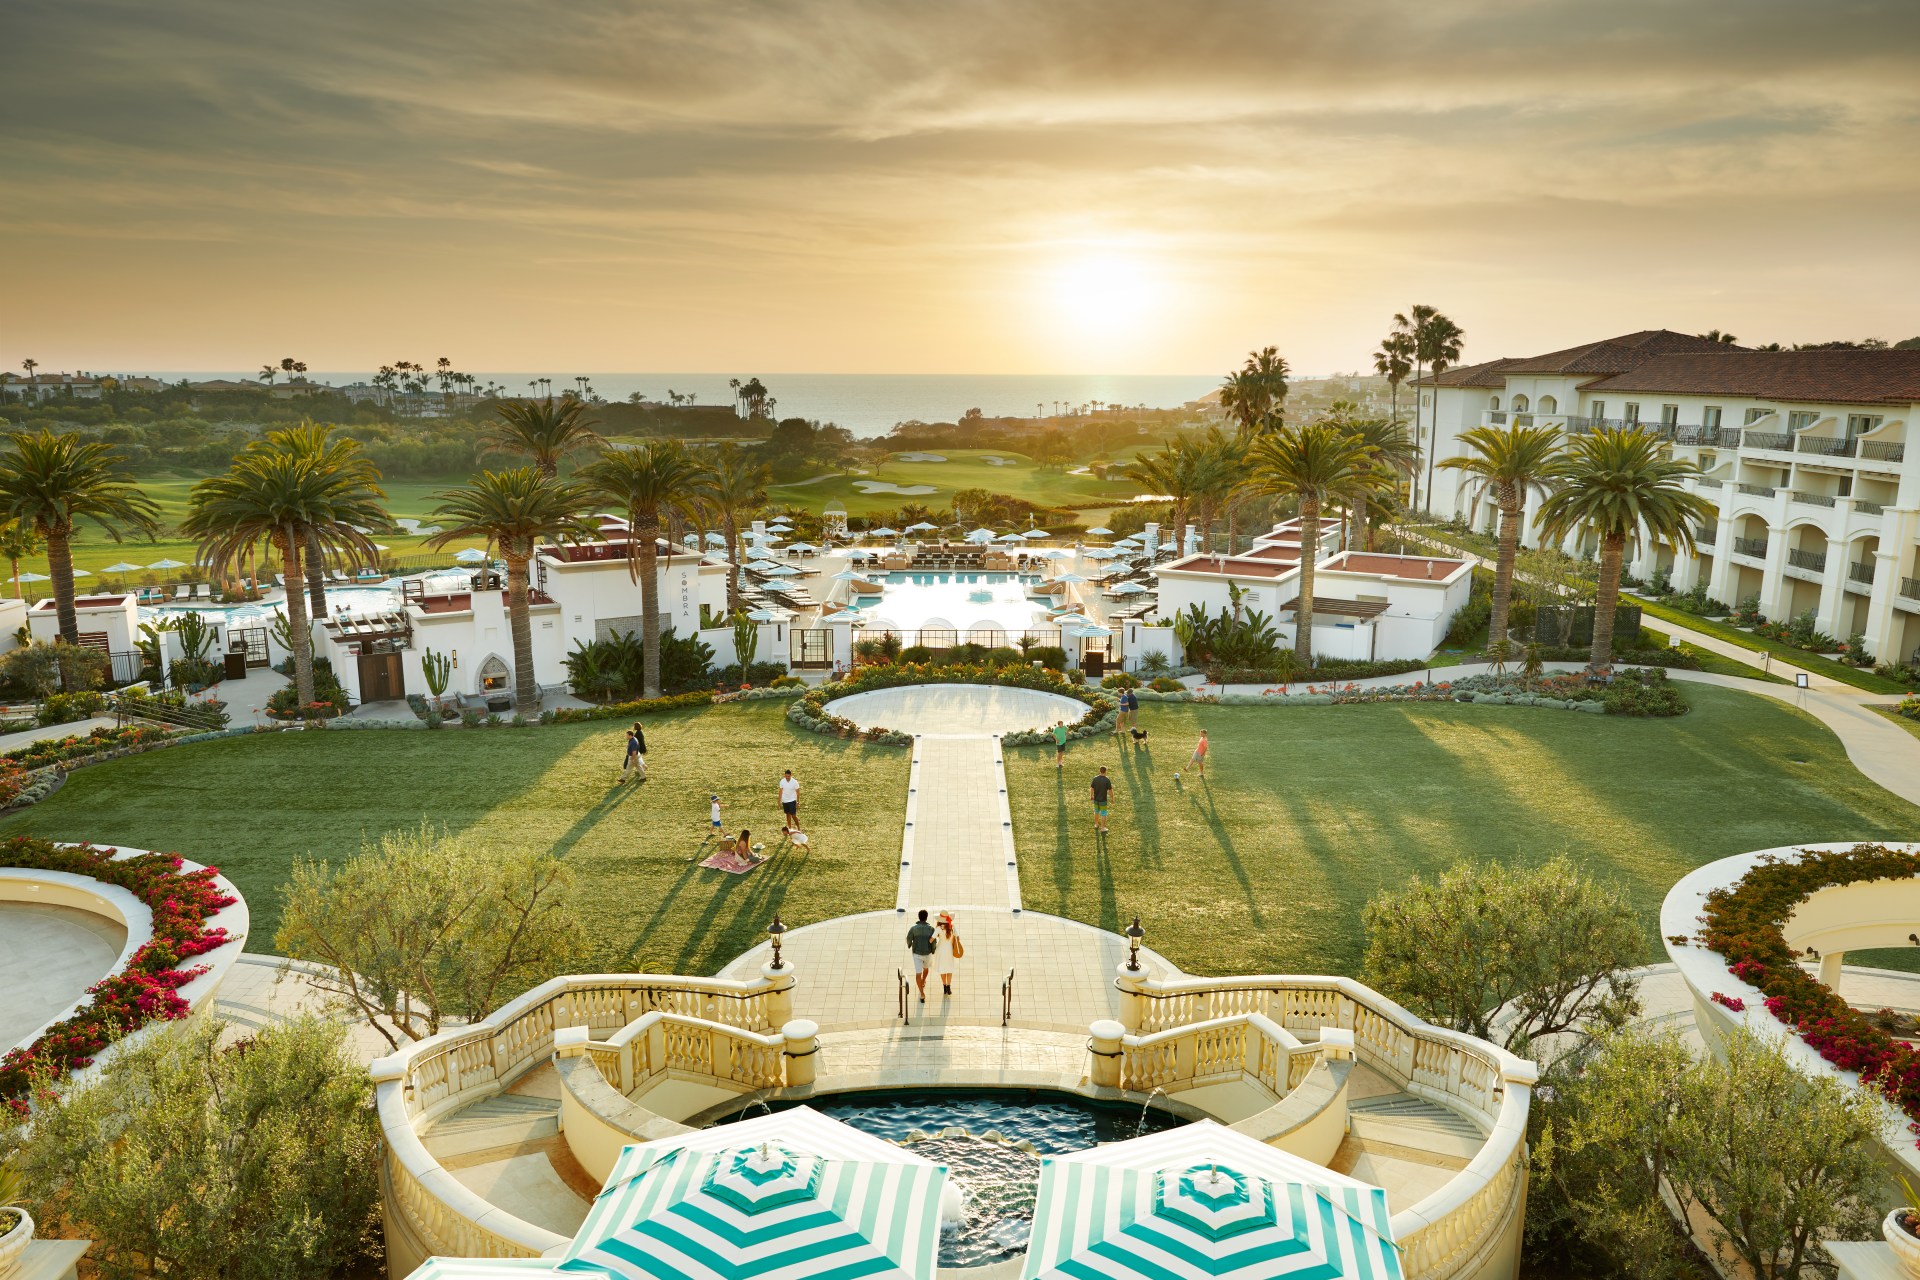 Waldorf Astoria Monarch Beach Resort & Club - Aerial, hotel exterior, landscaping, golf course, ocean view, sunset, pool, palm trees, fountain, staircases